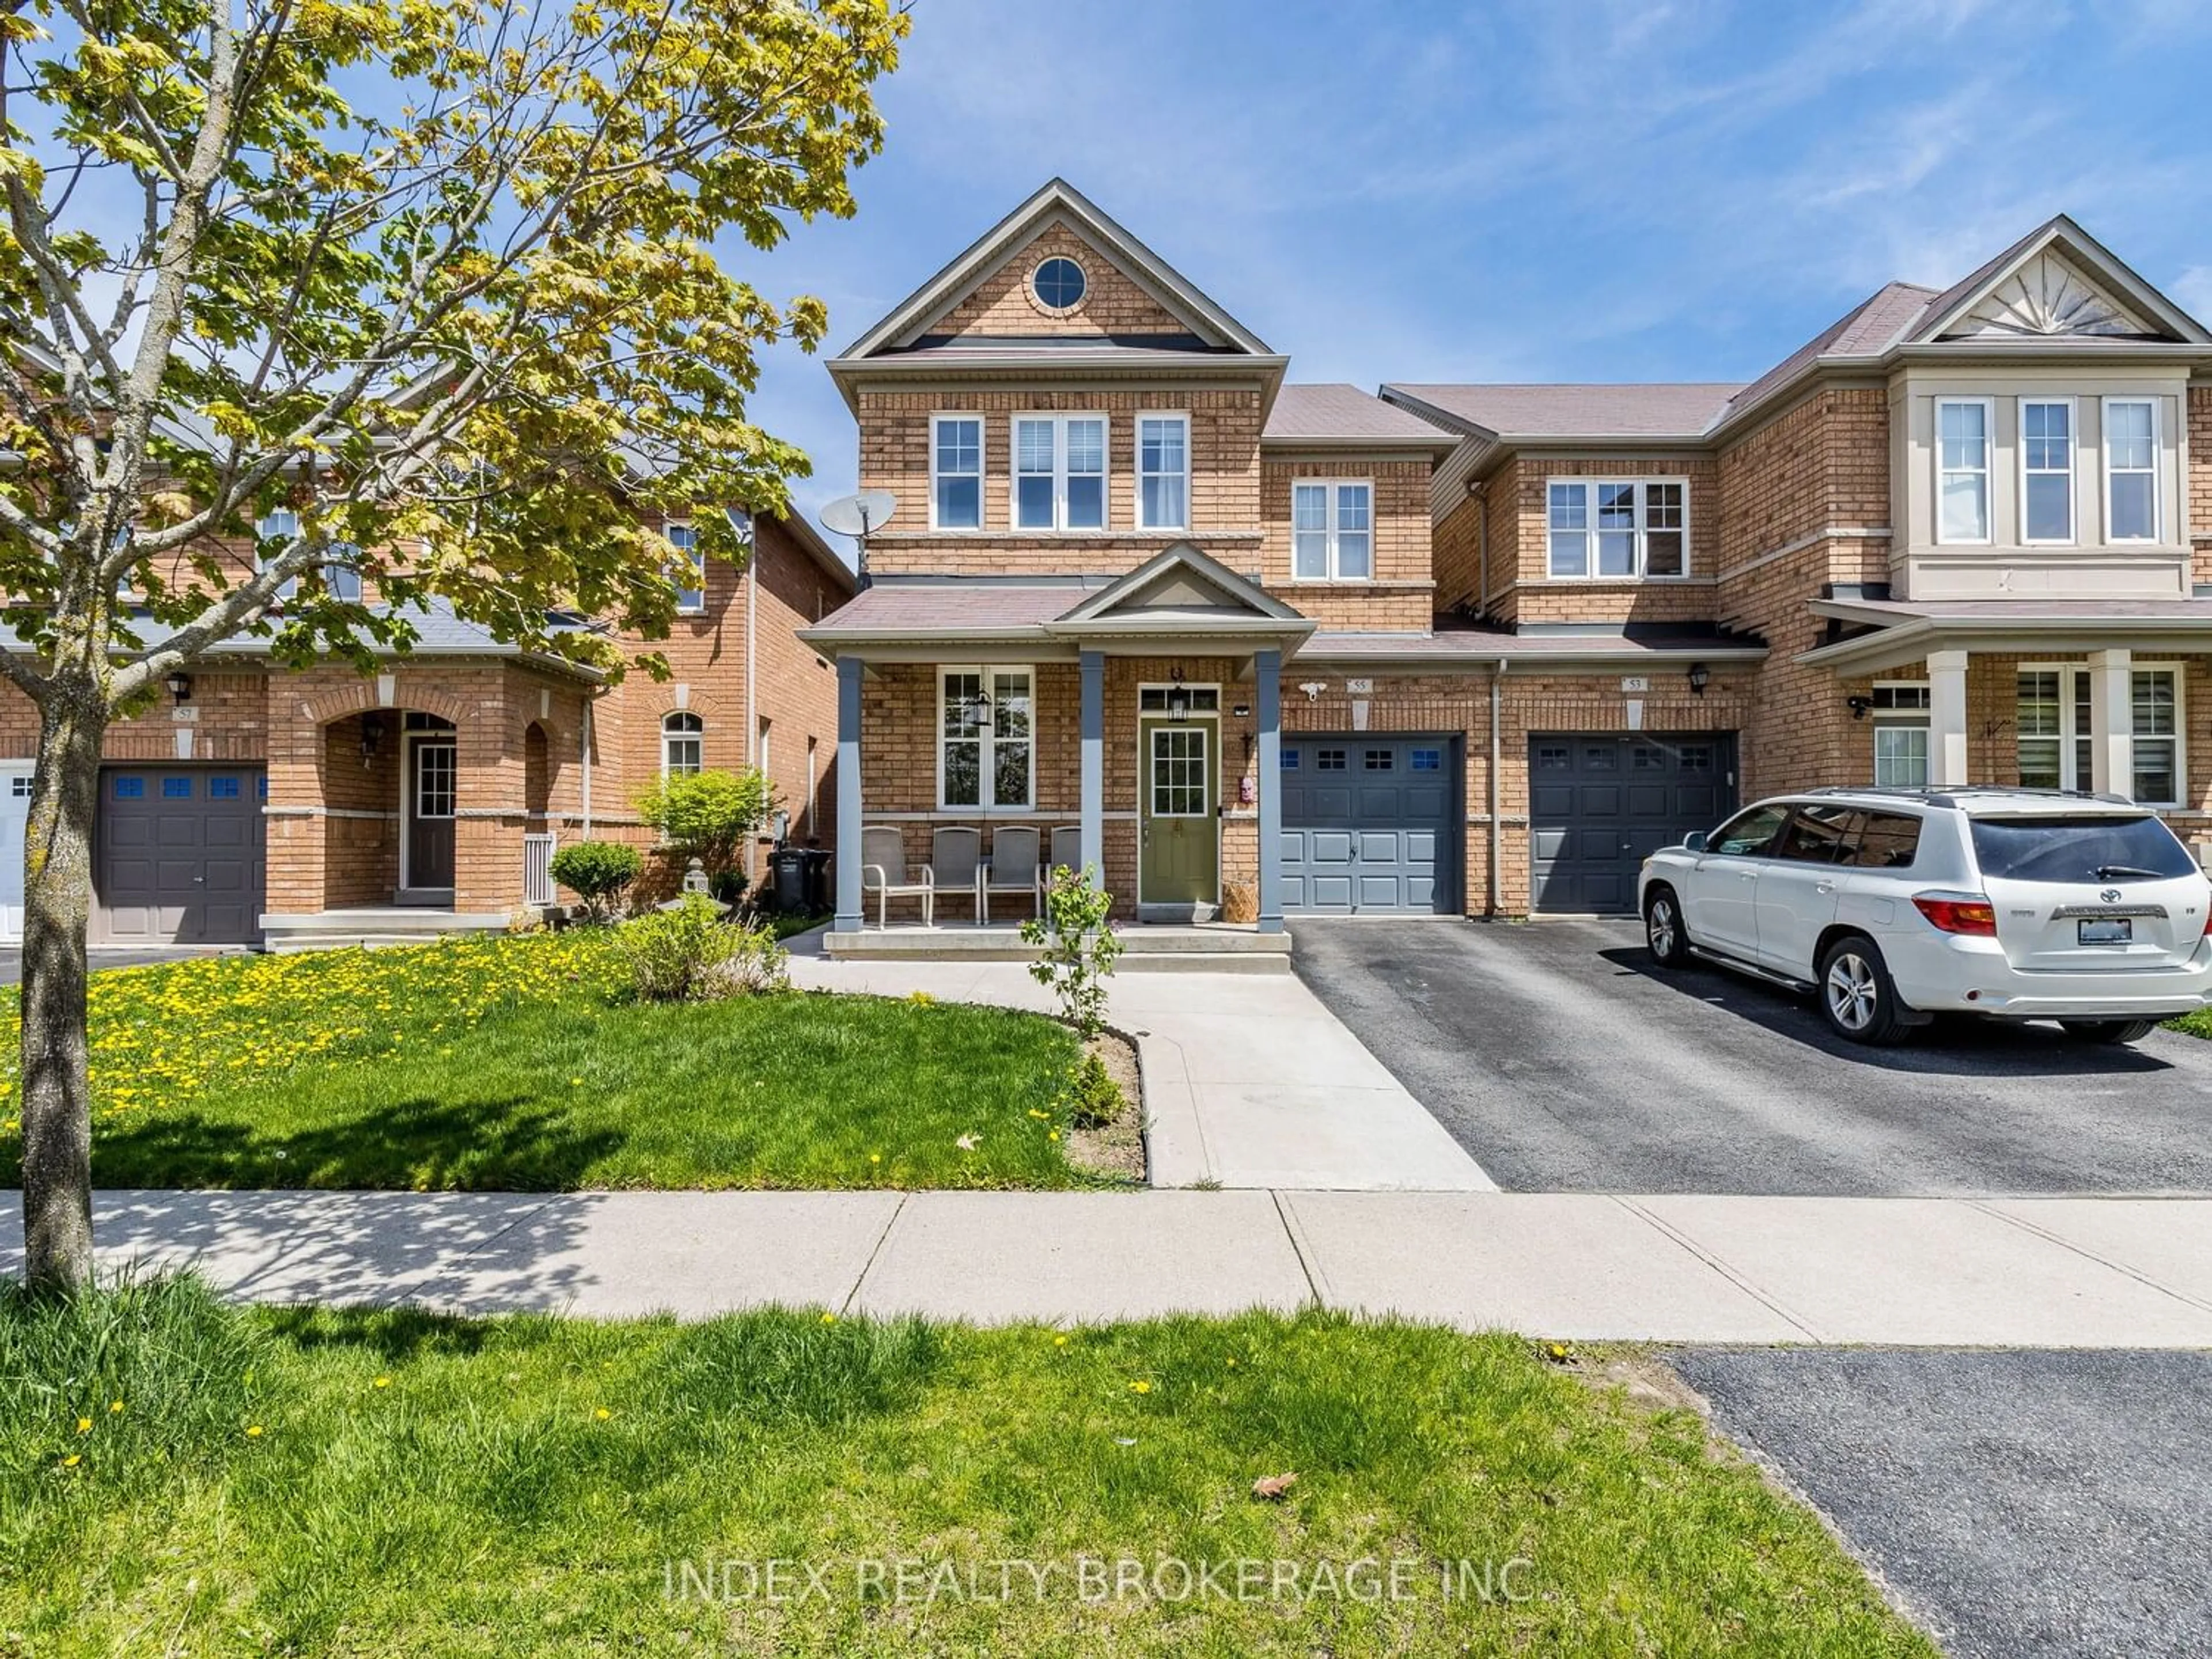 Home with brick exterior material for 55 Iceland Poppy Tr, Brampton Ontario L7A 0N1